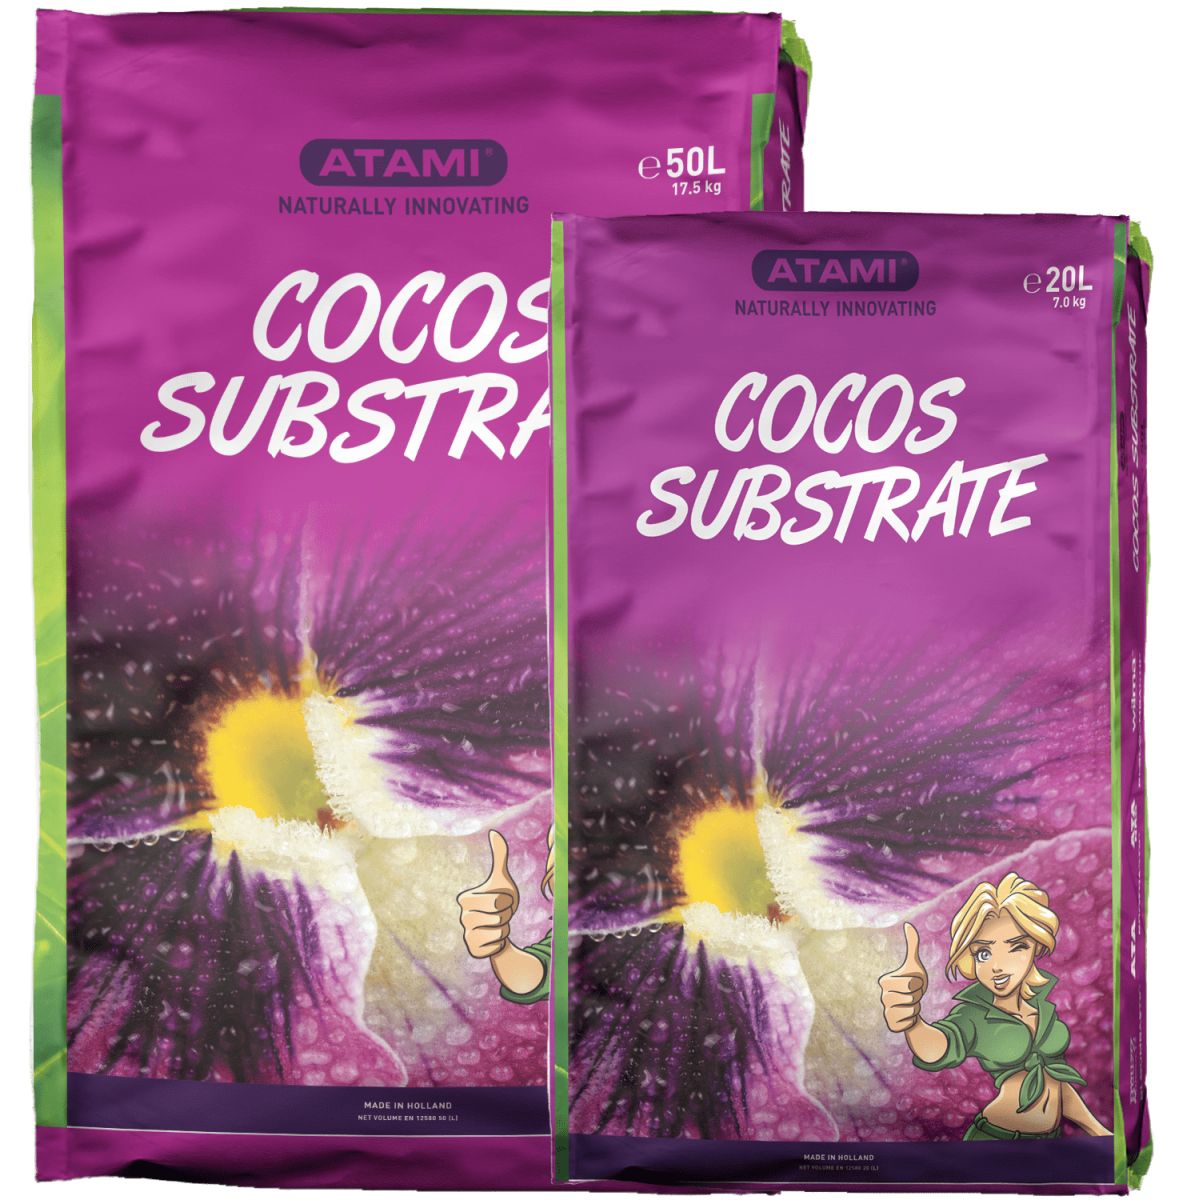 Cocos substrate 50 L